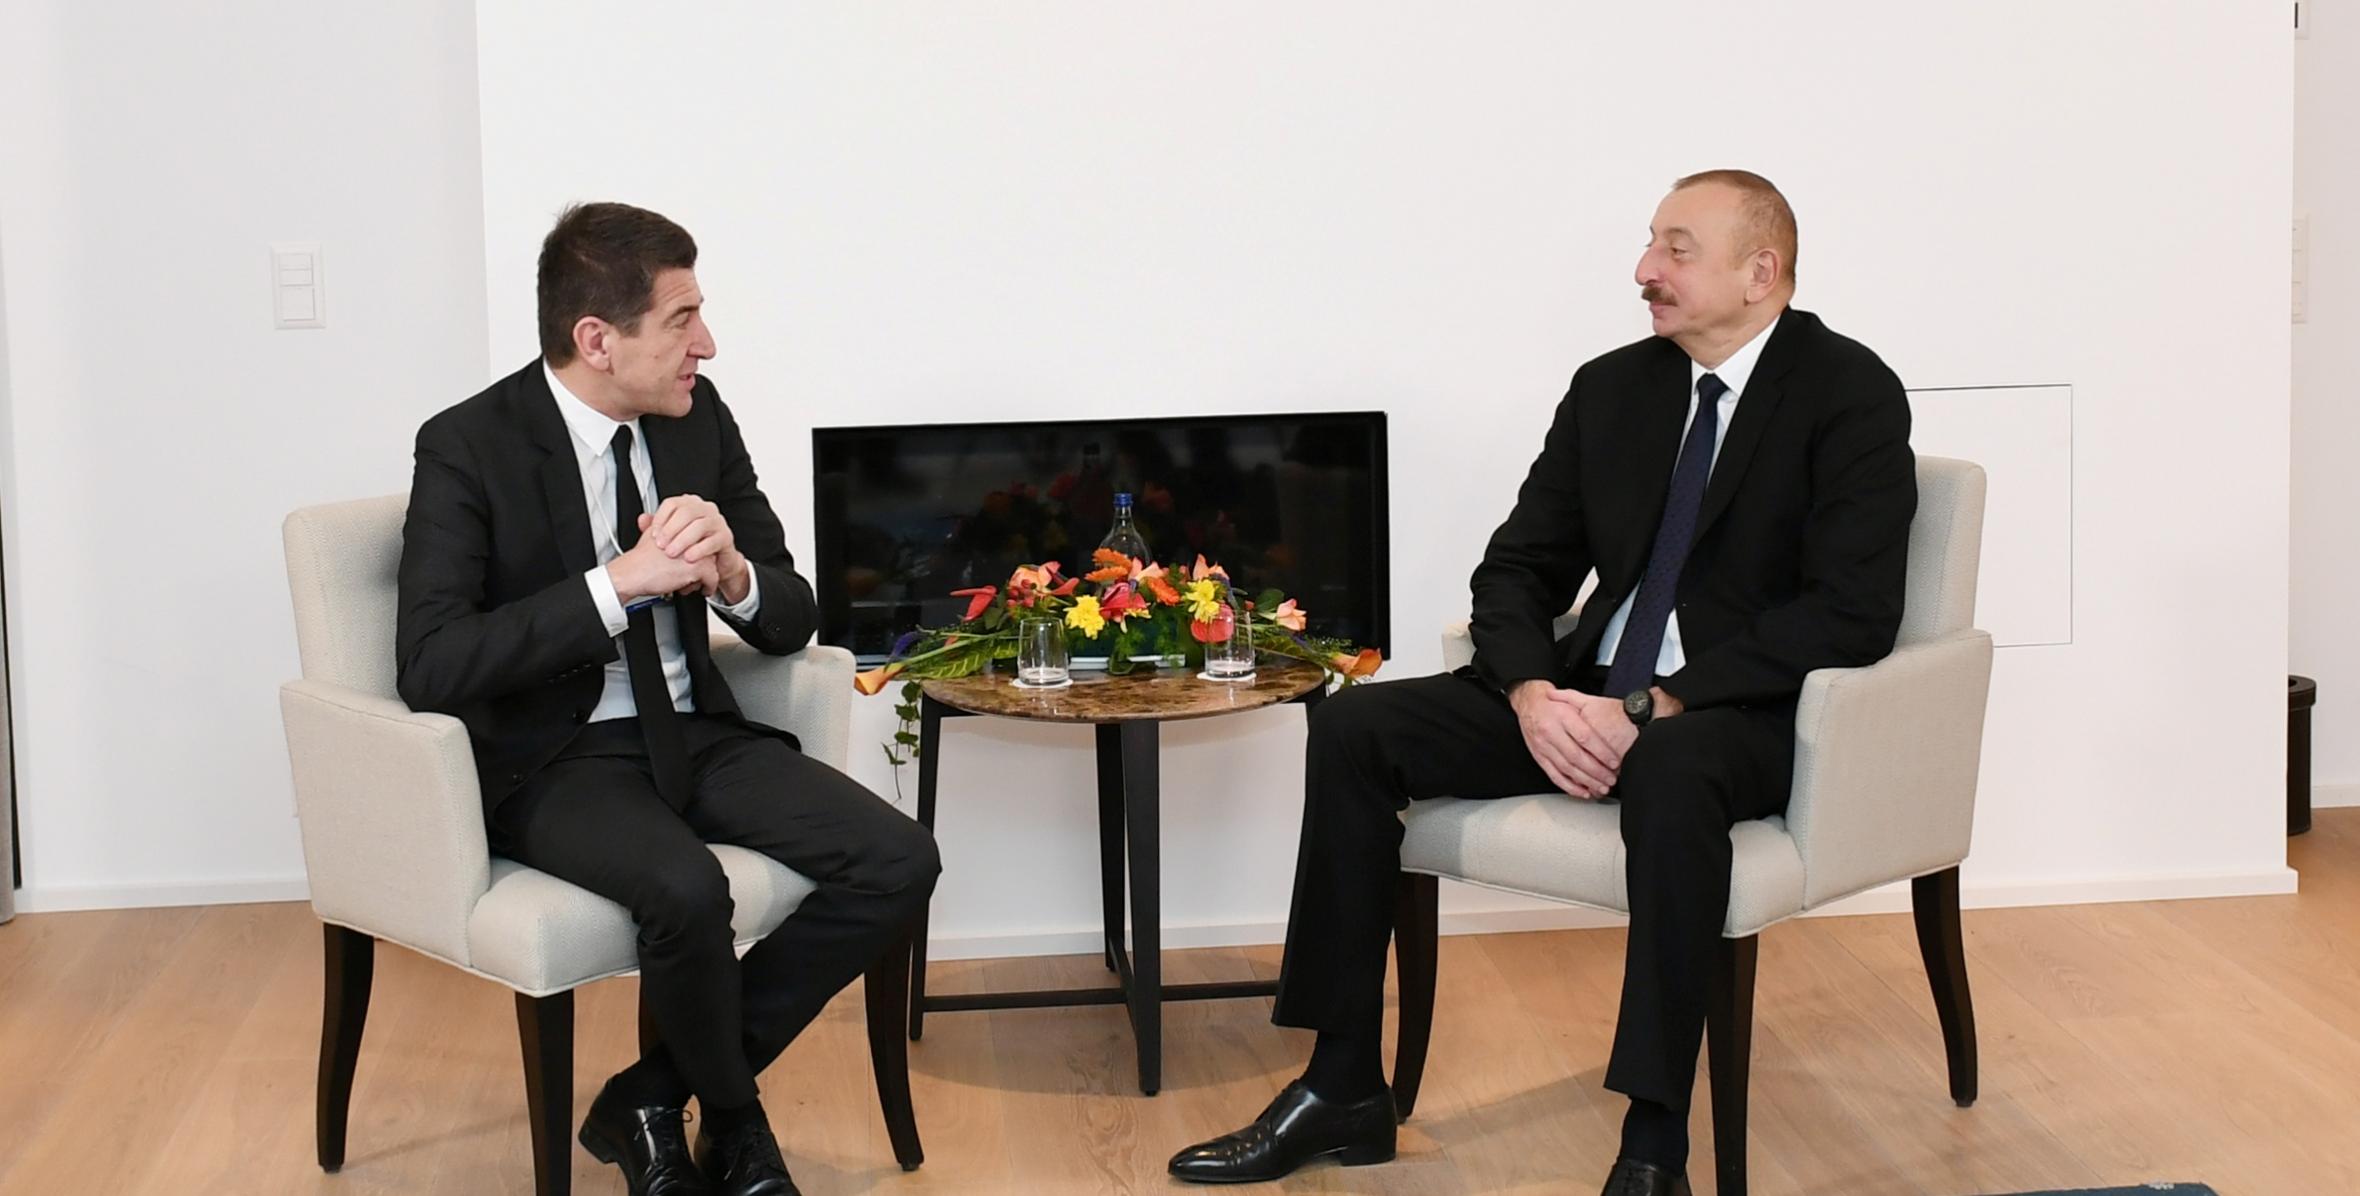 Ilham Aliyev met with Chief Executive Officer of Lazard Freres